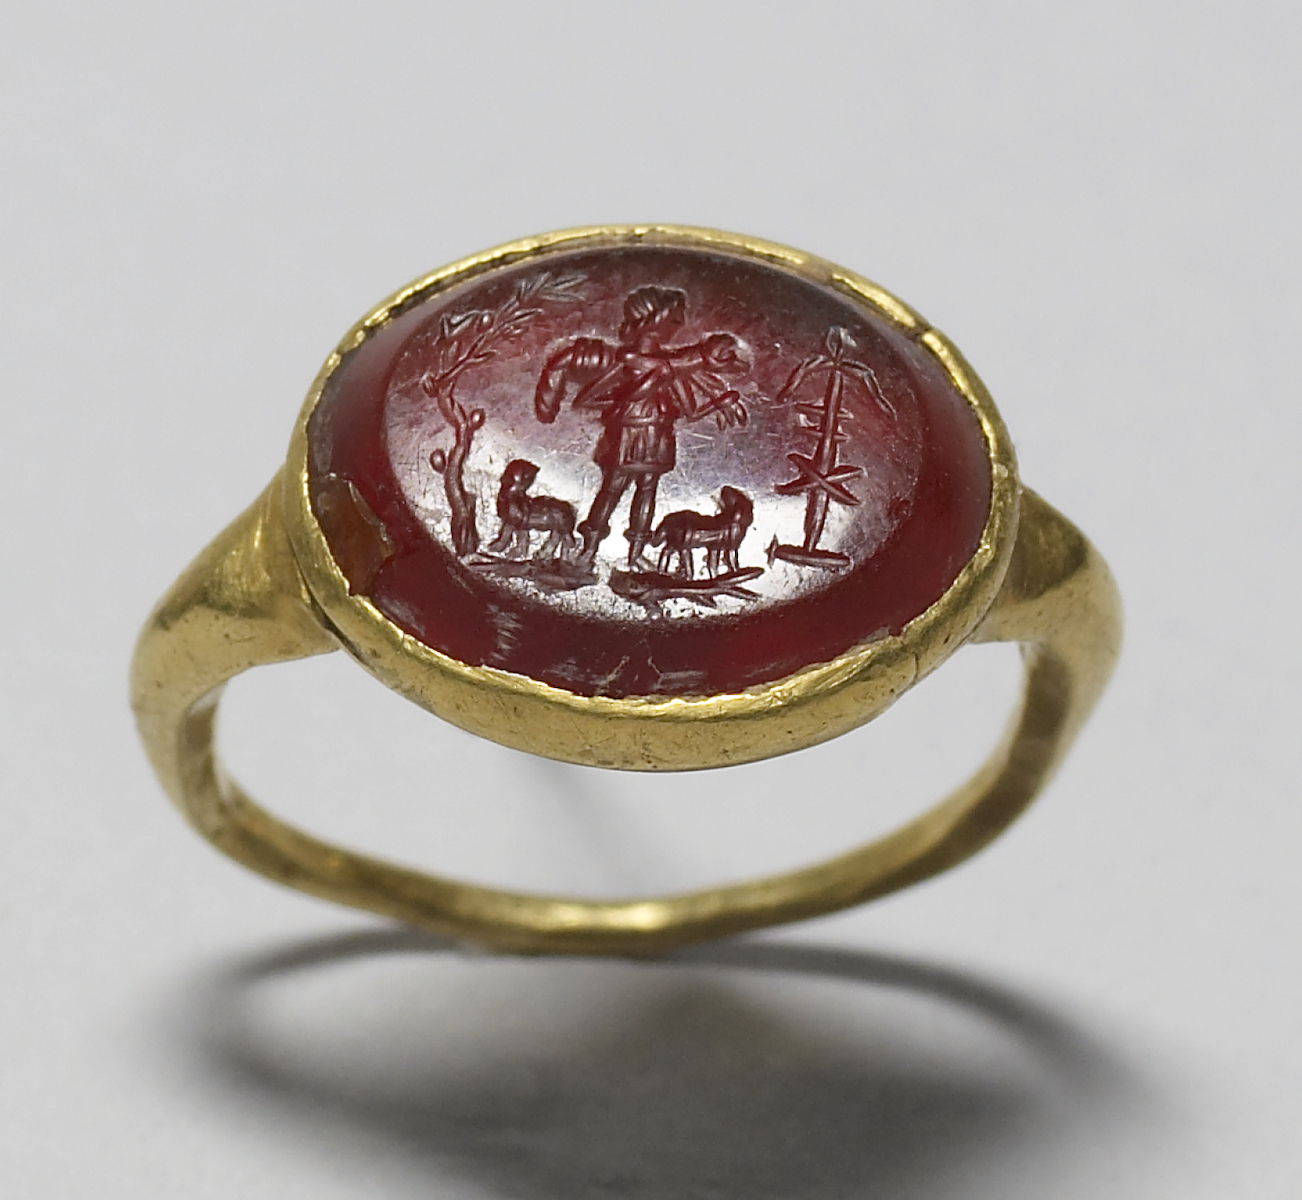 Gold jewelry ring set with oval red gem carved with scene of a young man, wearing tunic, holding sheep over shoulders and flanked by two sheep and a tree with dove and anchor with monogram.